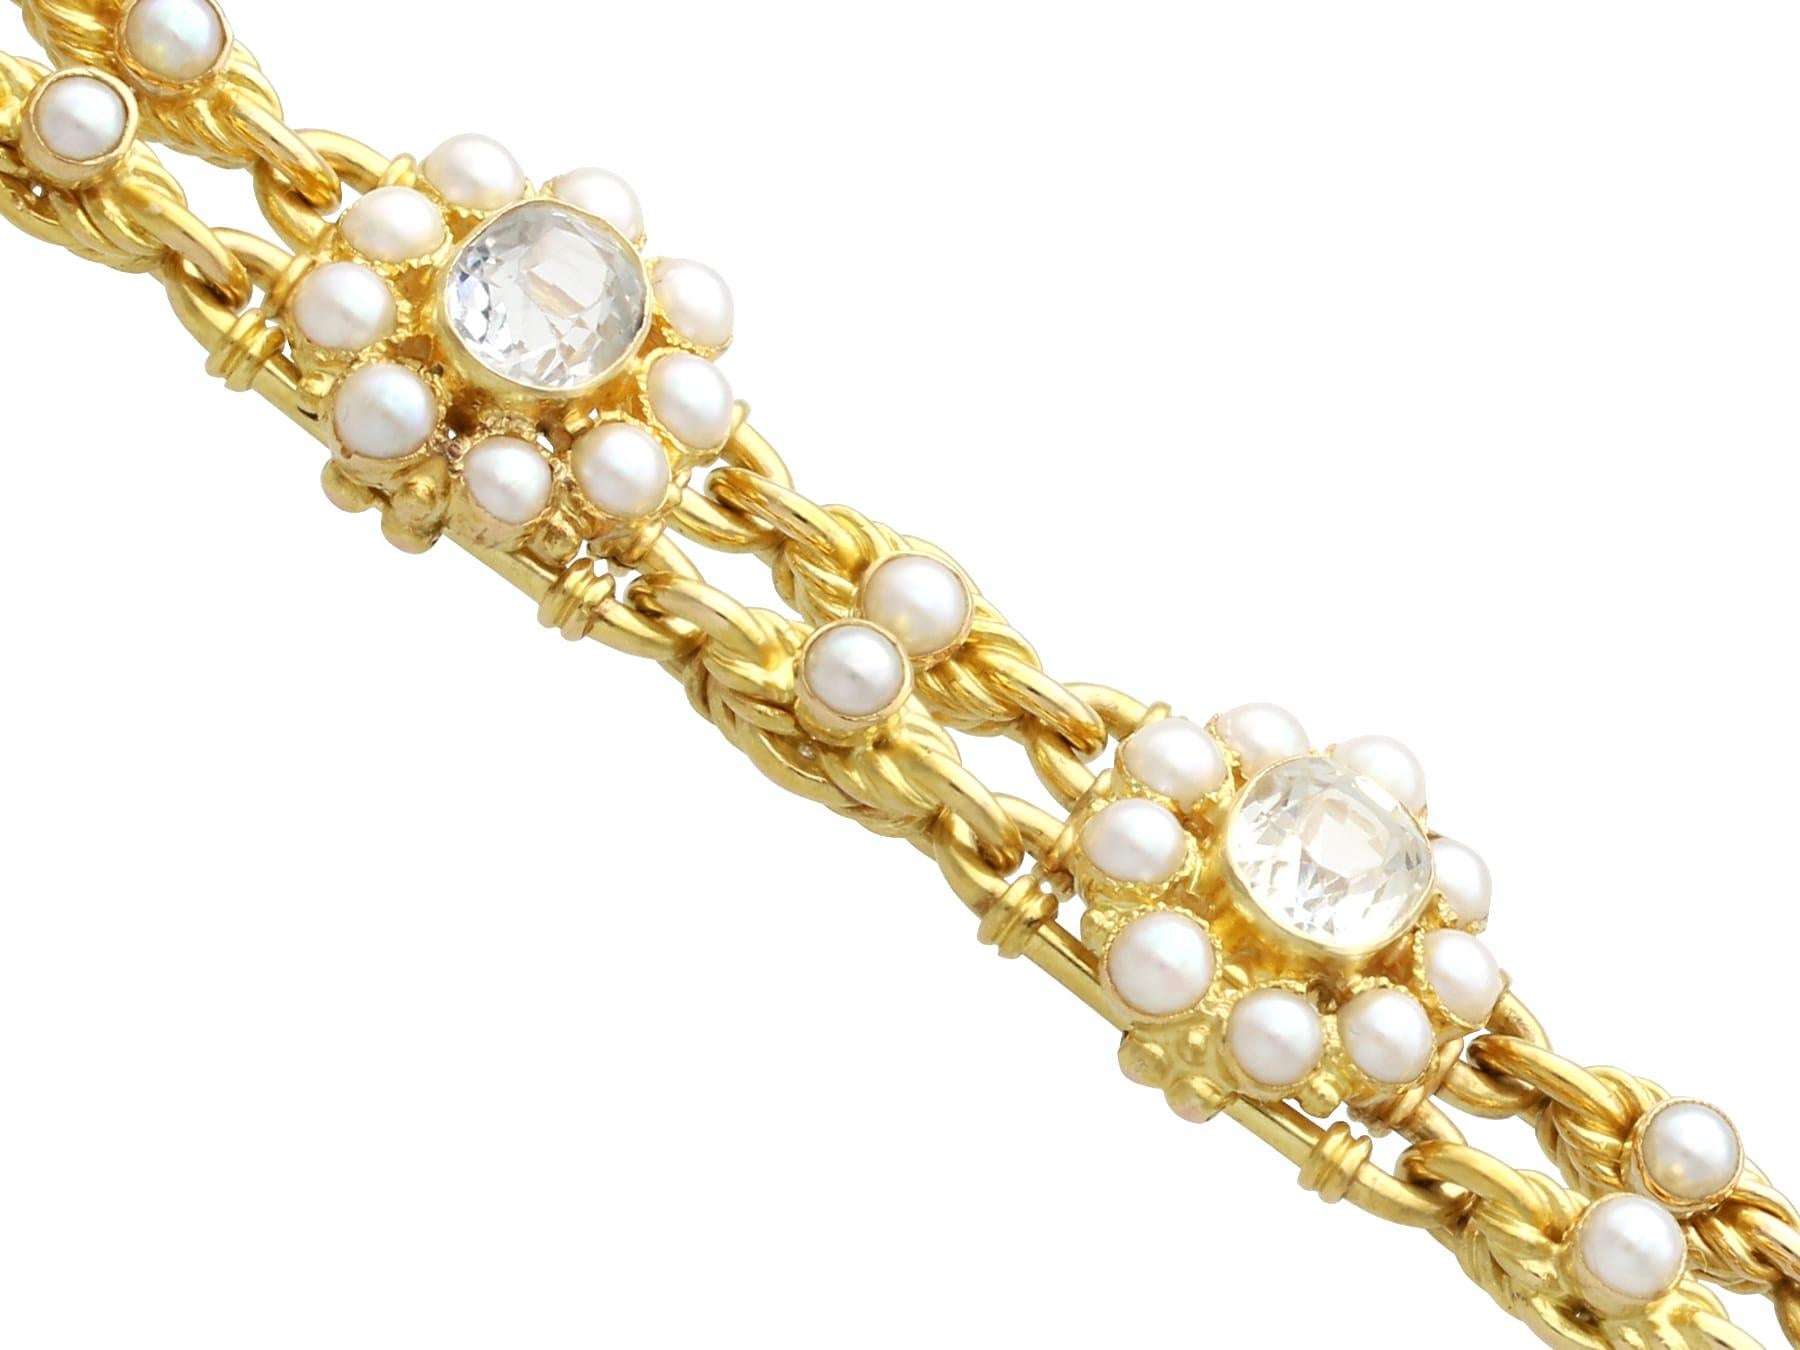 Victorian 9.50 Carat Rock Crystal and Natural Pearl 18K Yellow Gold Bracelet In Excellent Condition For Sale In Jesmond, Newcastle Upon Tyne